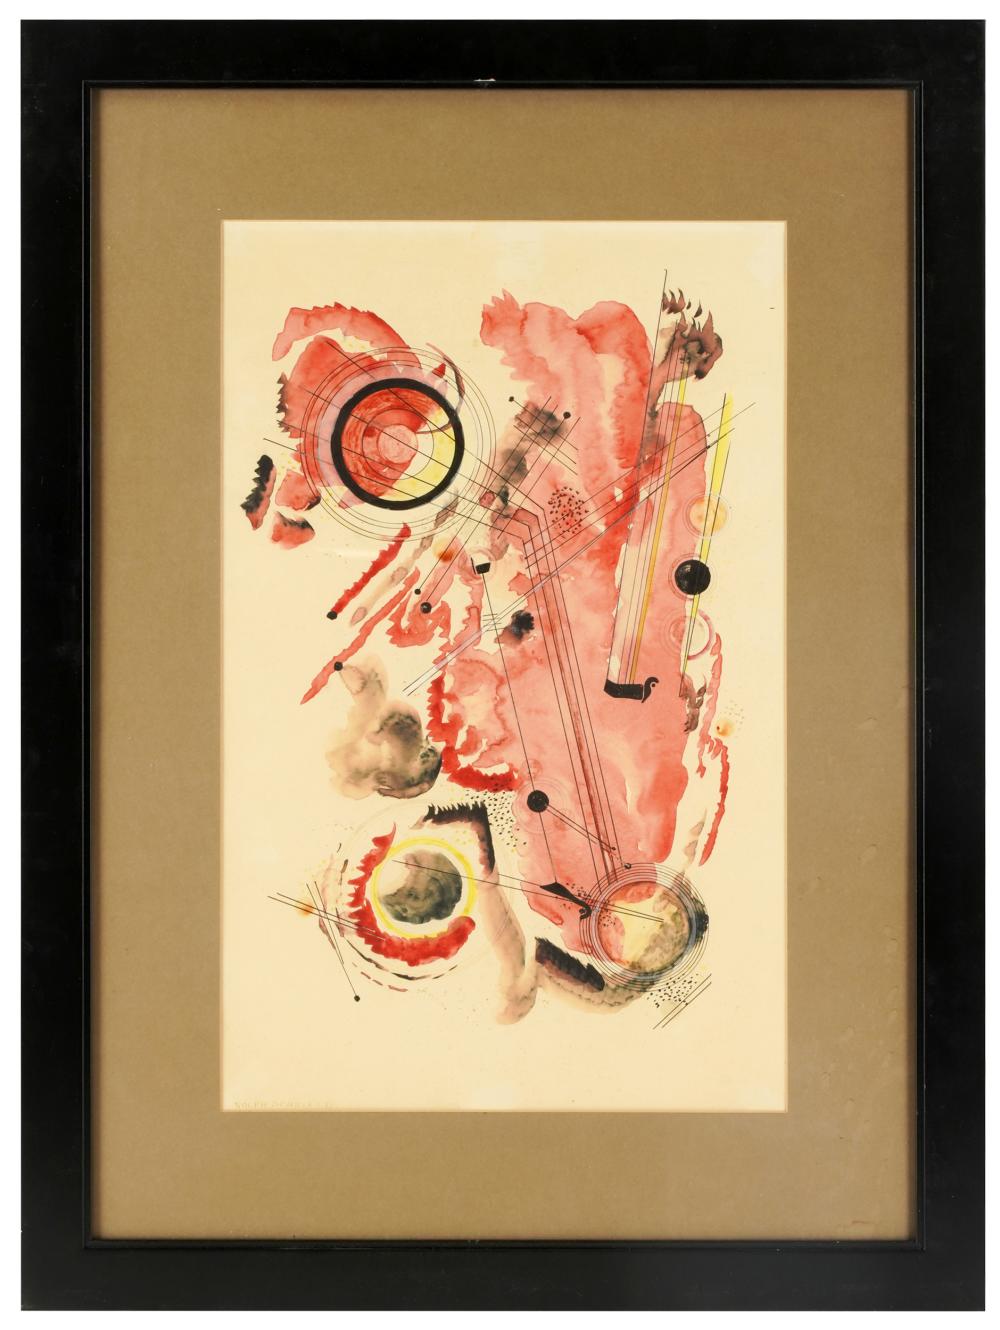 ROLPH SCARLETT 1889 1984 ABSTRACTwatercolor 3311f4